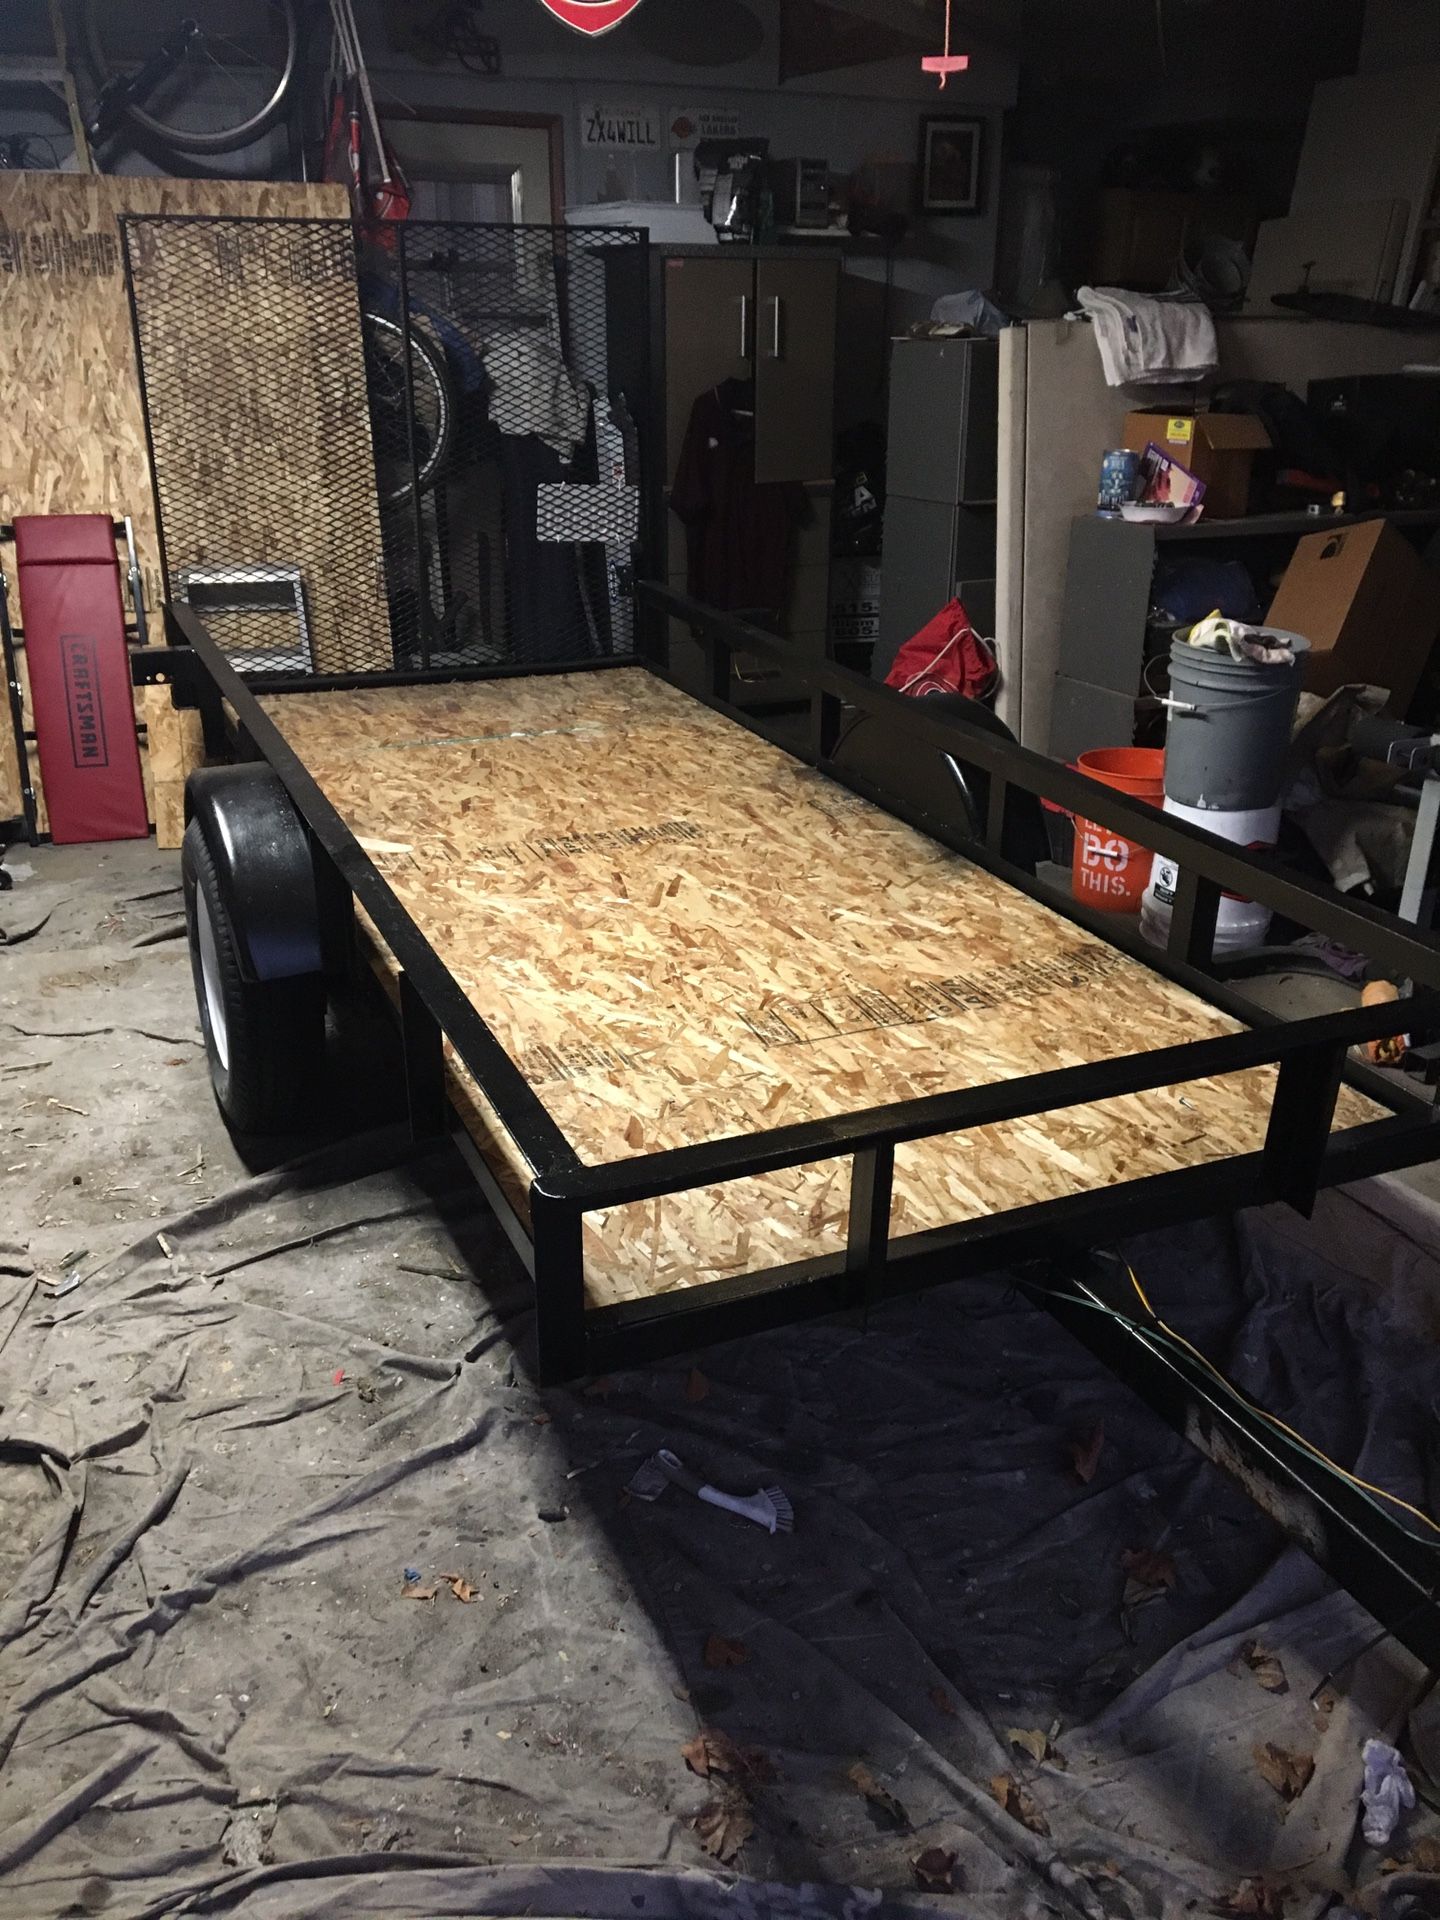 Texas trailer 10 x 4 new flooring and lights with current registration and pink